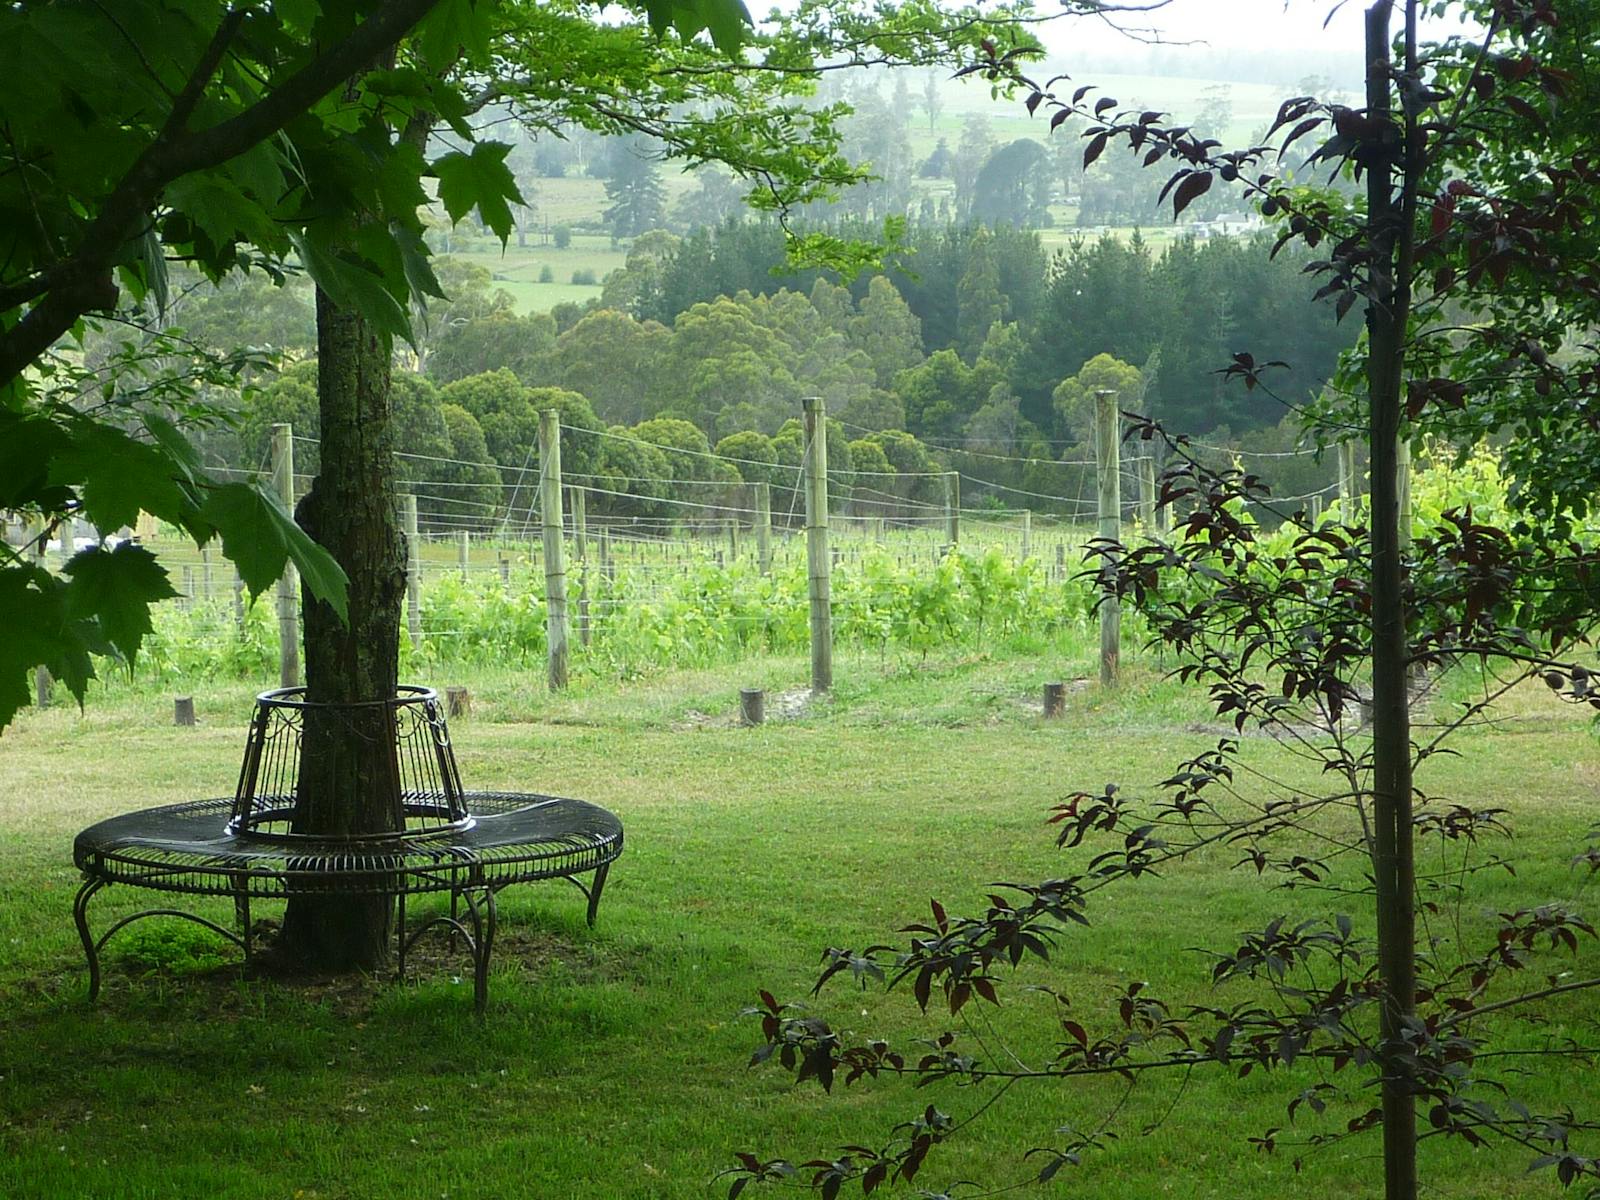 Sit and enjoy the view and the tranquility at Grey Sands vineyard